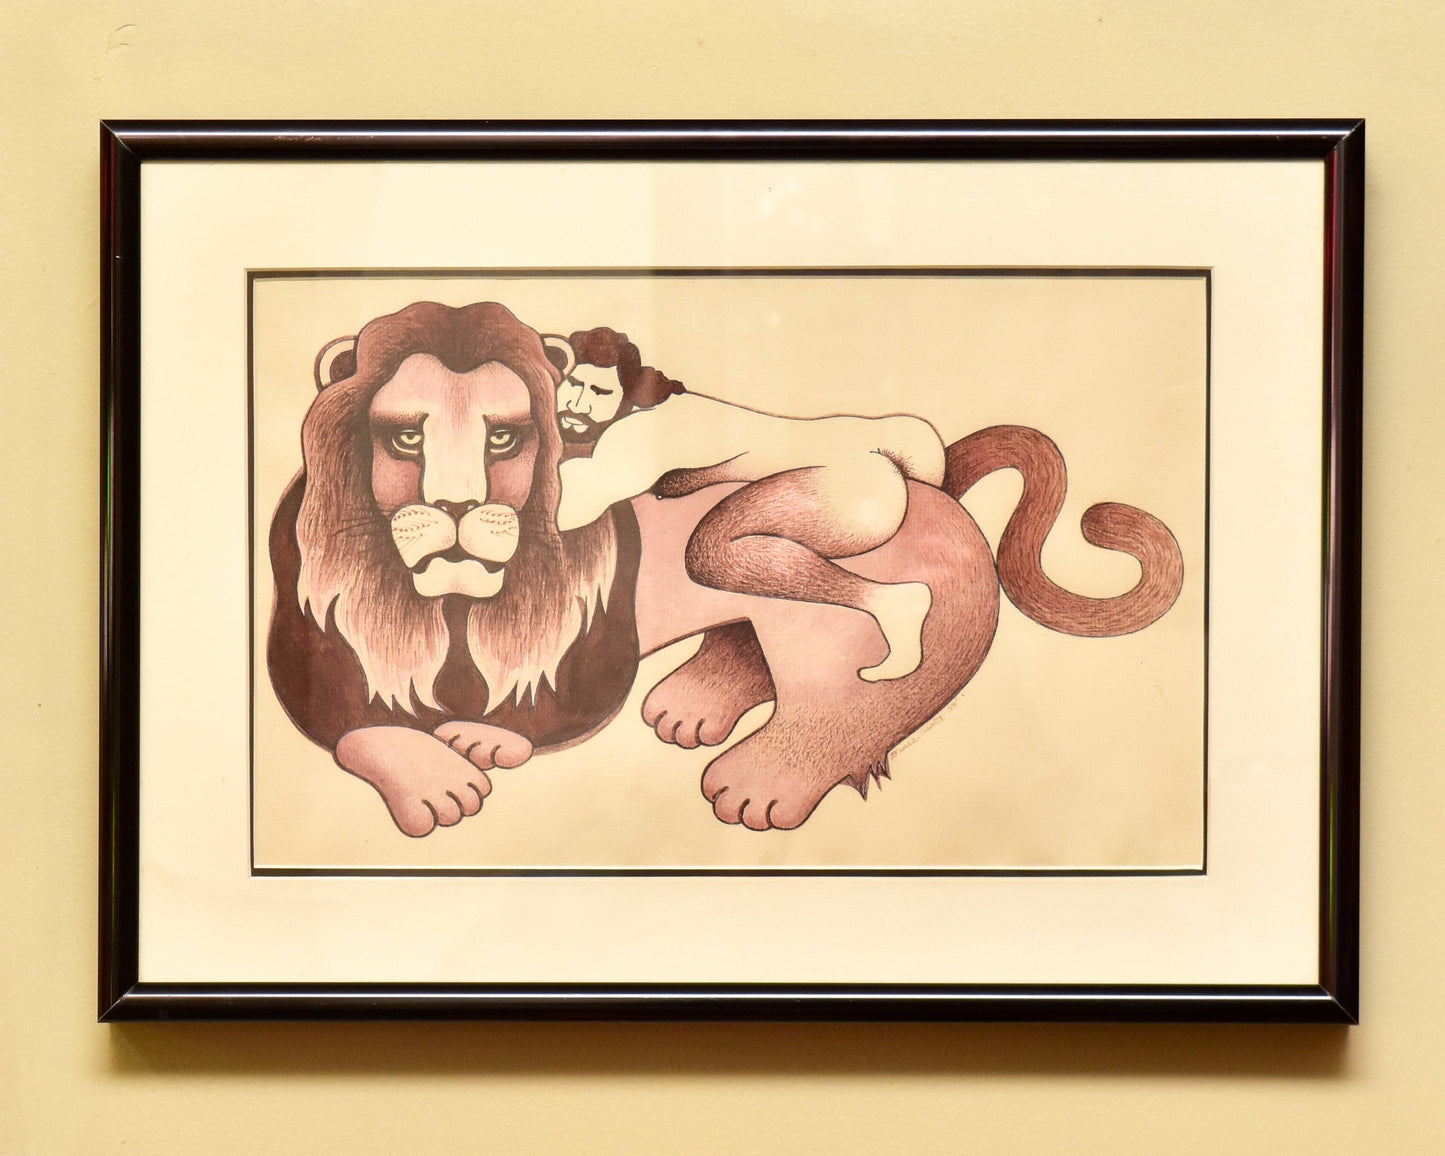 Framed 1988 Nude Man On Maned Lion Drawing/Painting, Unknown Artist, Vintage Erotica Wall Art, 16.75" X 12"